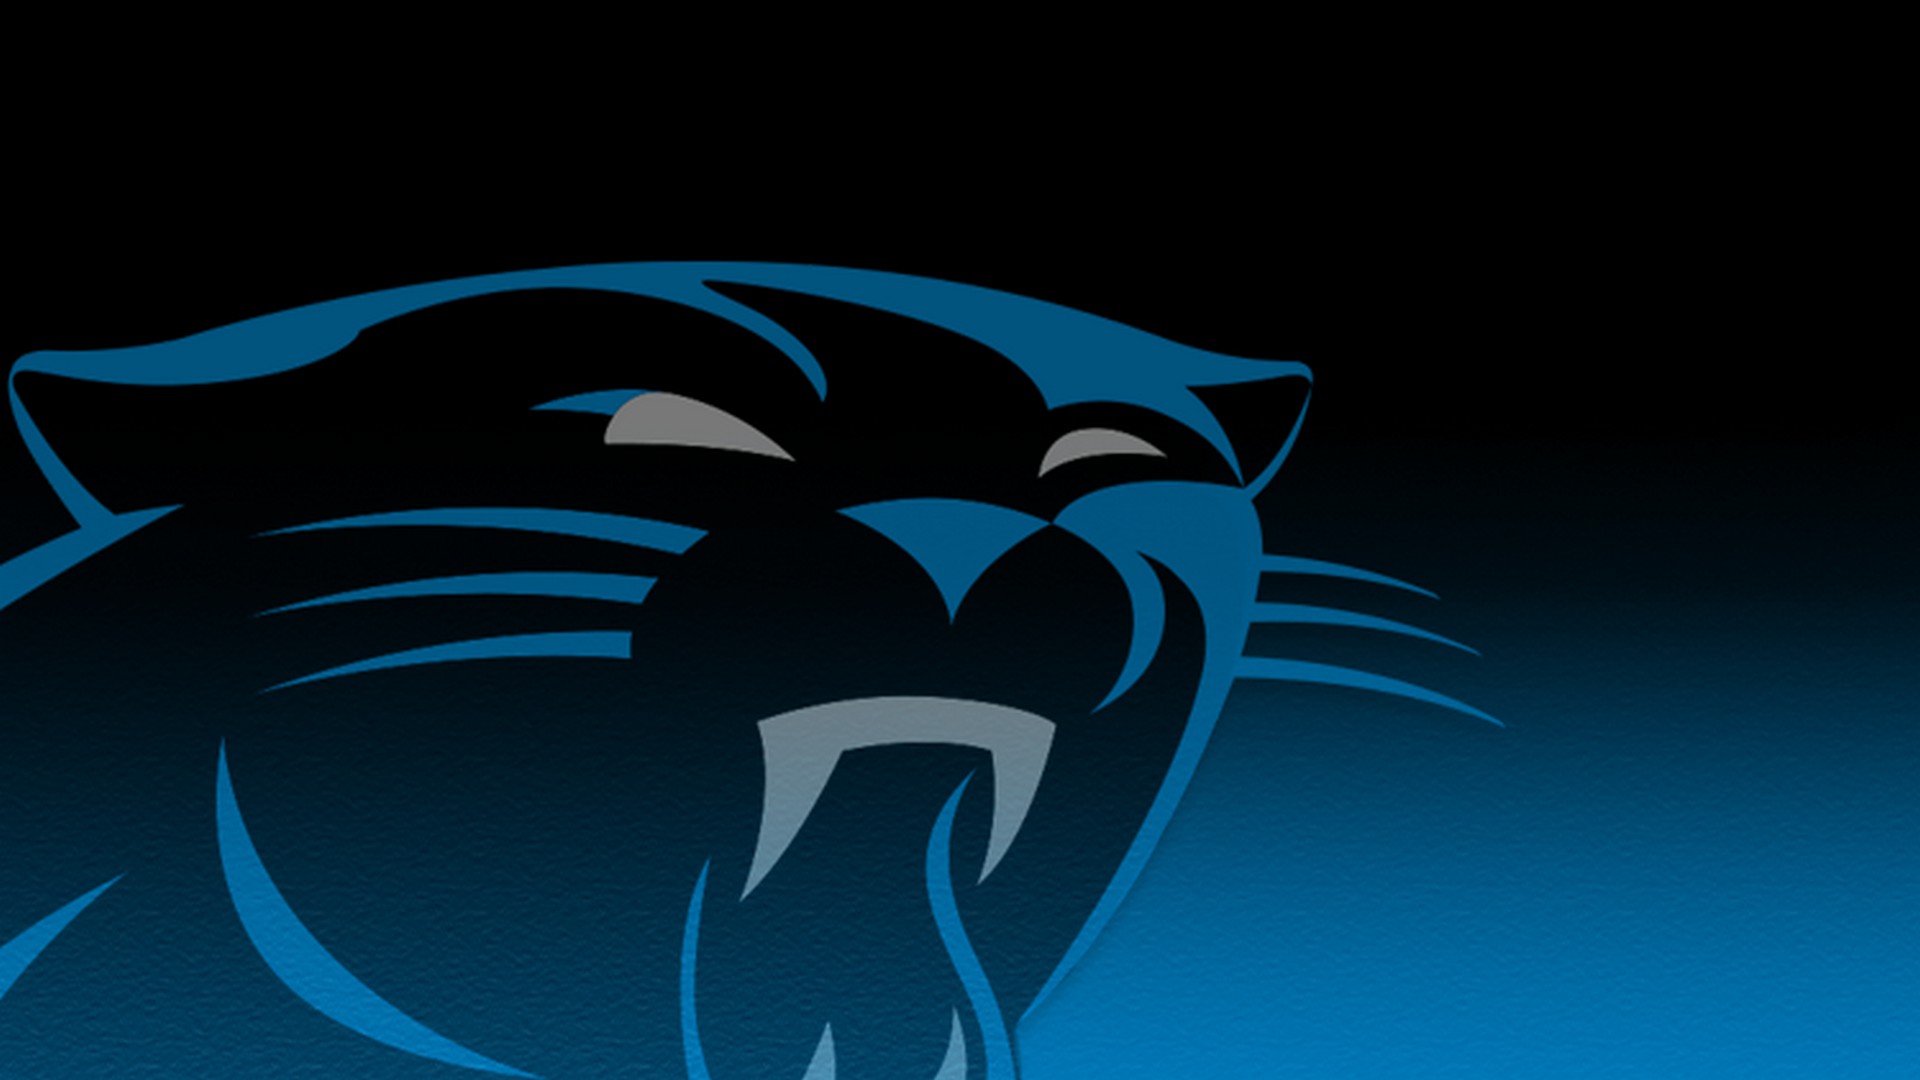 Carolina Panthers Wallpaper For Mac Backgrounds With Resolution 1920X1080